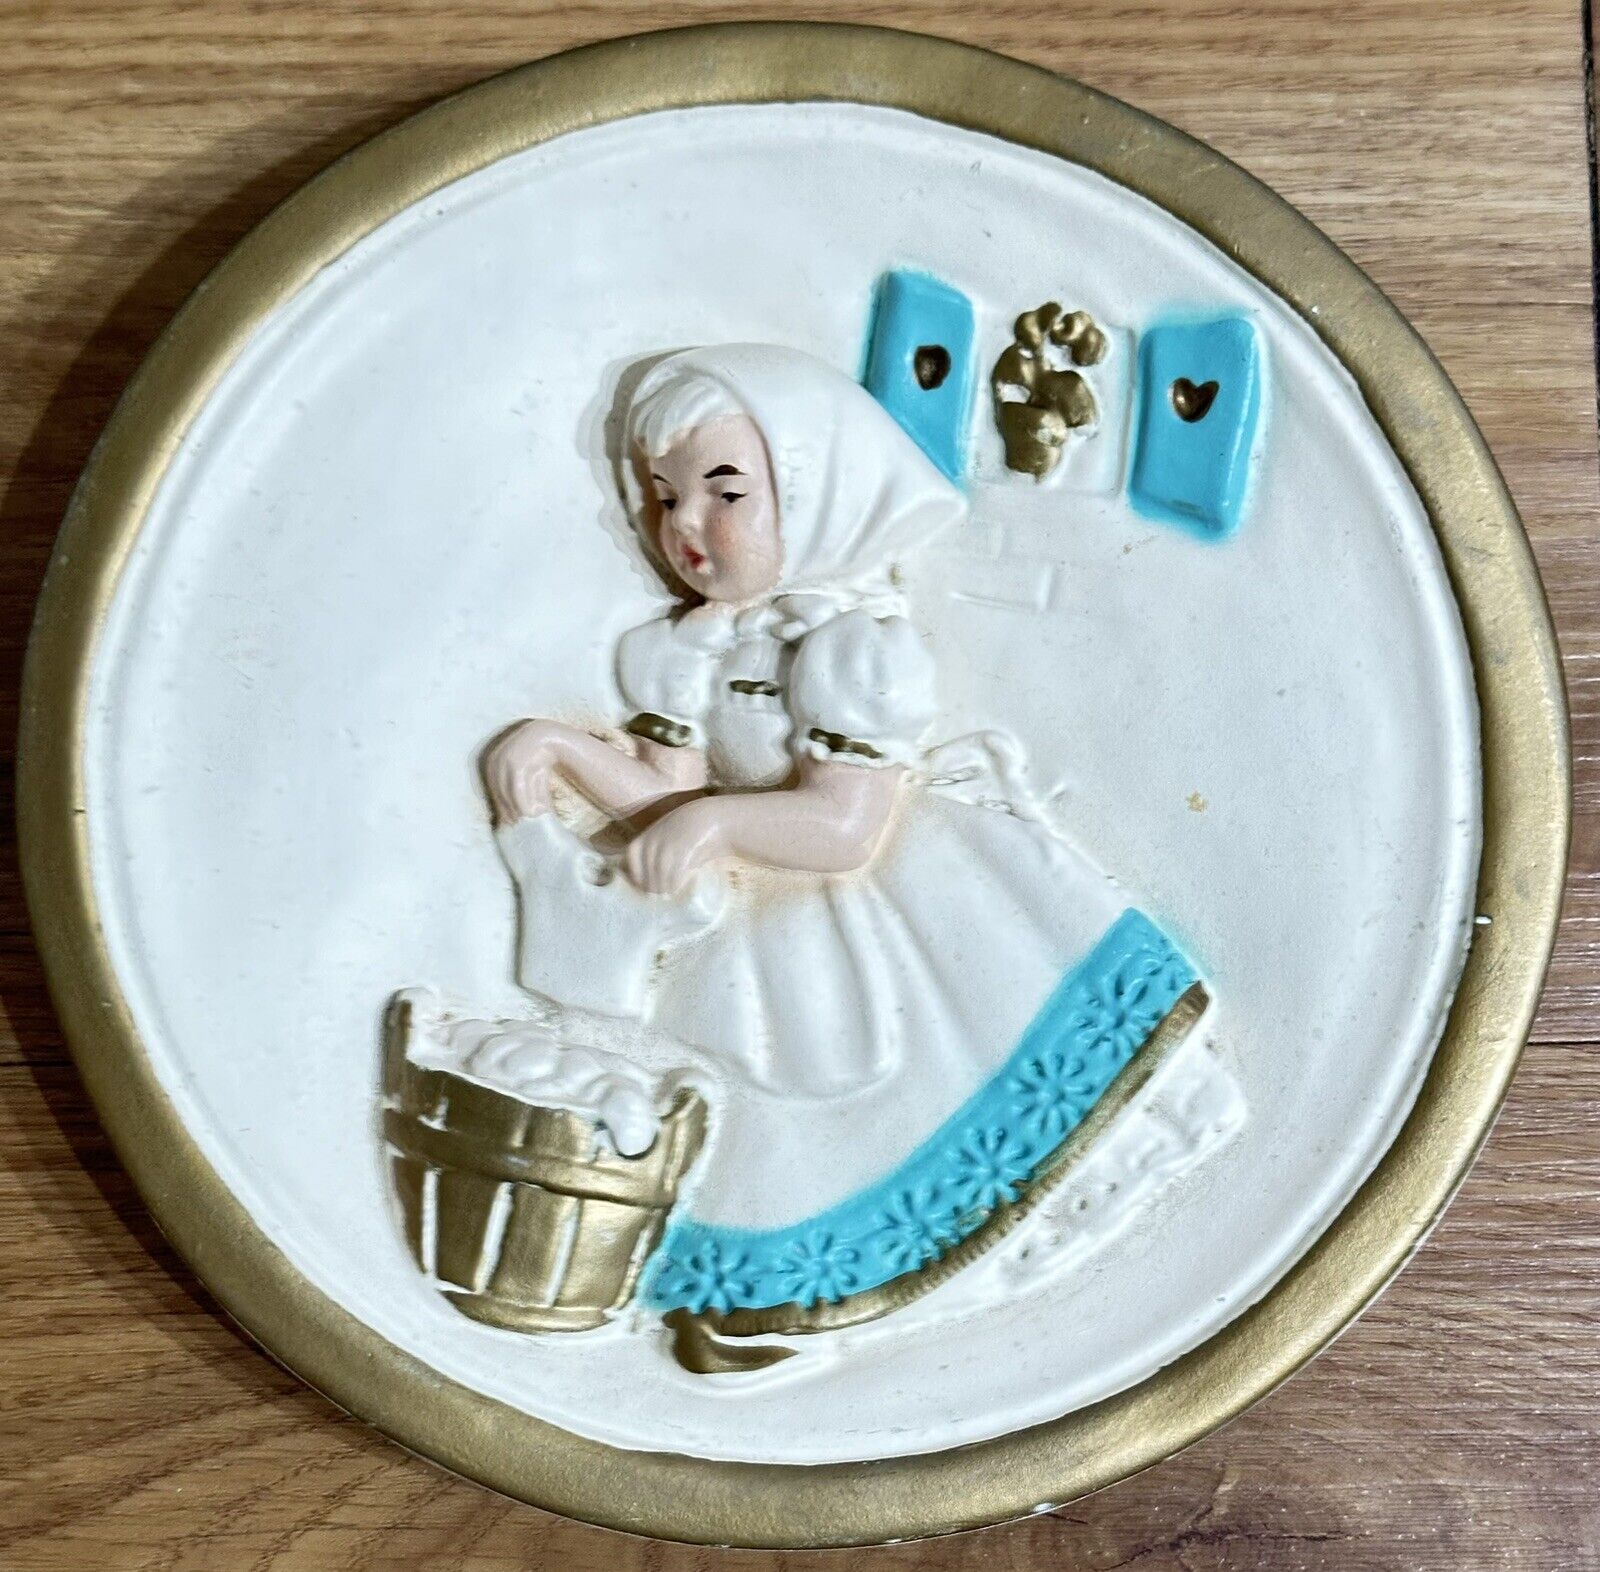 Wash Day Girl at Washtub Laundry Rm Decor Chalkware Plaster 3D Wall Plaque 7.25”